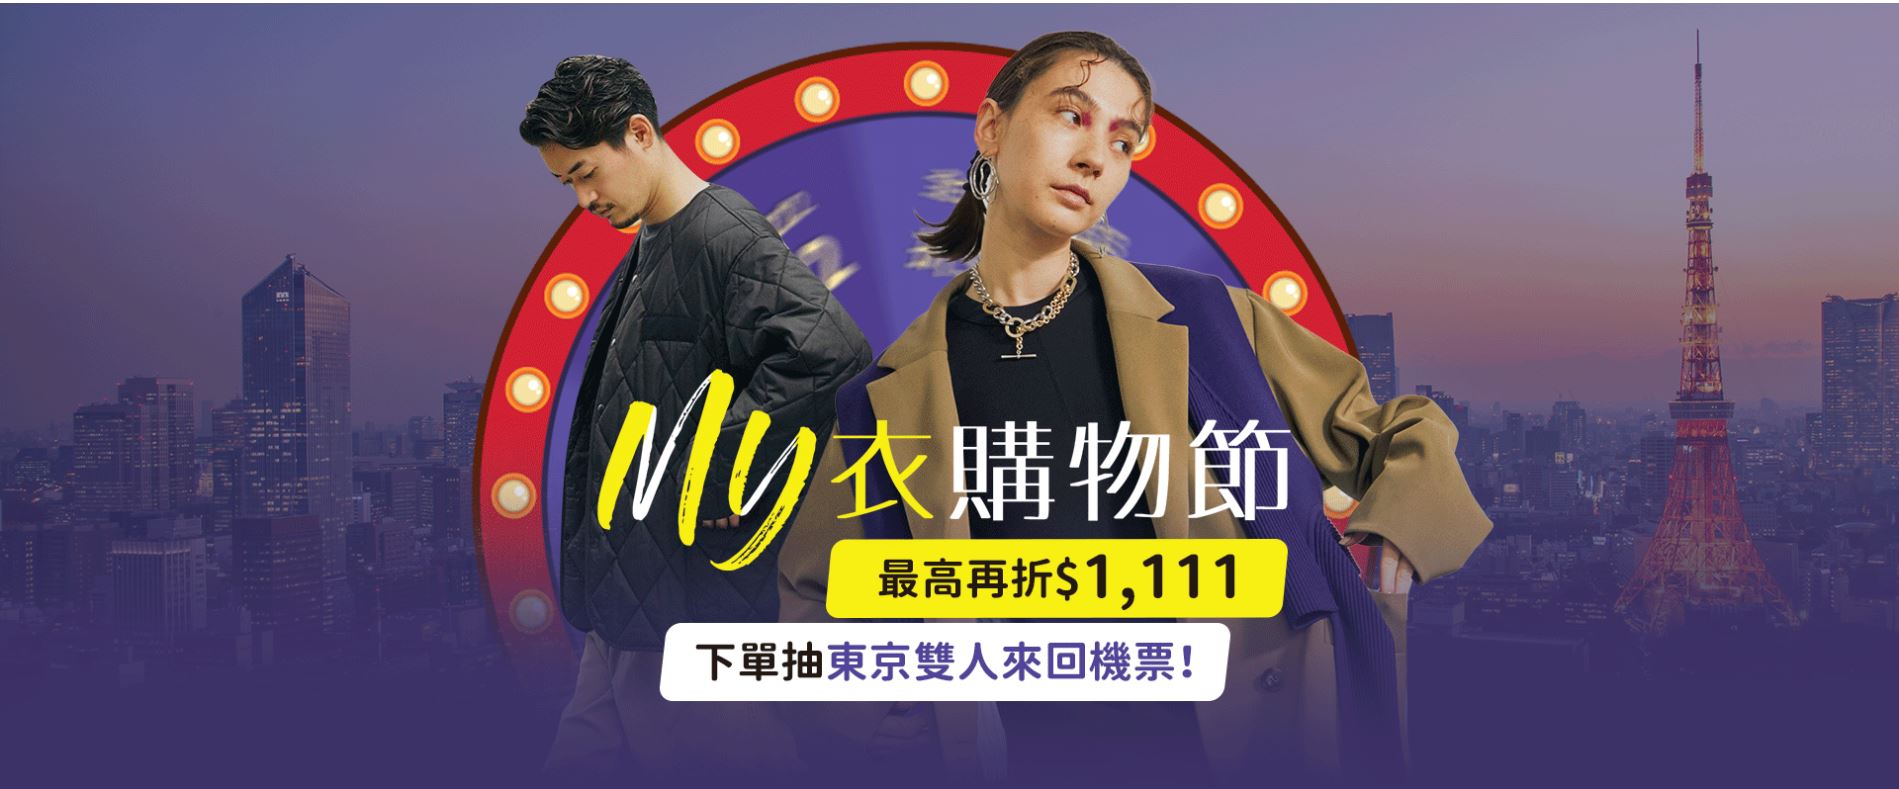 MiTCH Launches Double 11 Shopping Festival Campaigns online and Opens the Pop-up Store at SOGO Taipei Fuxing Store on November 10